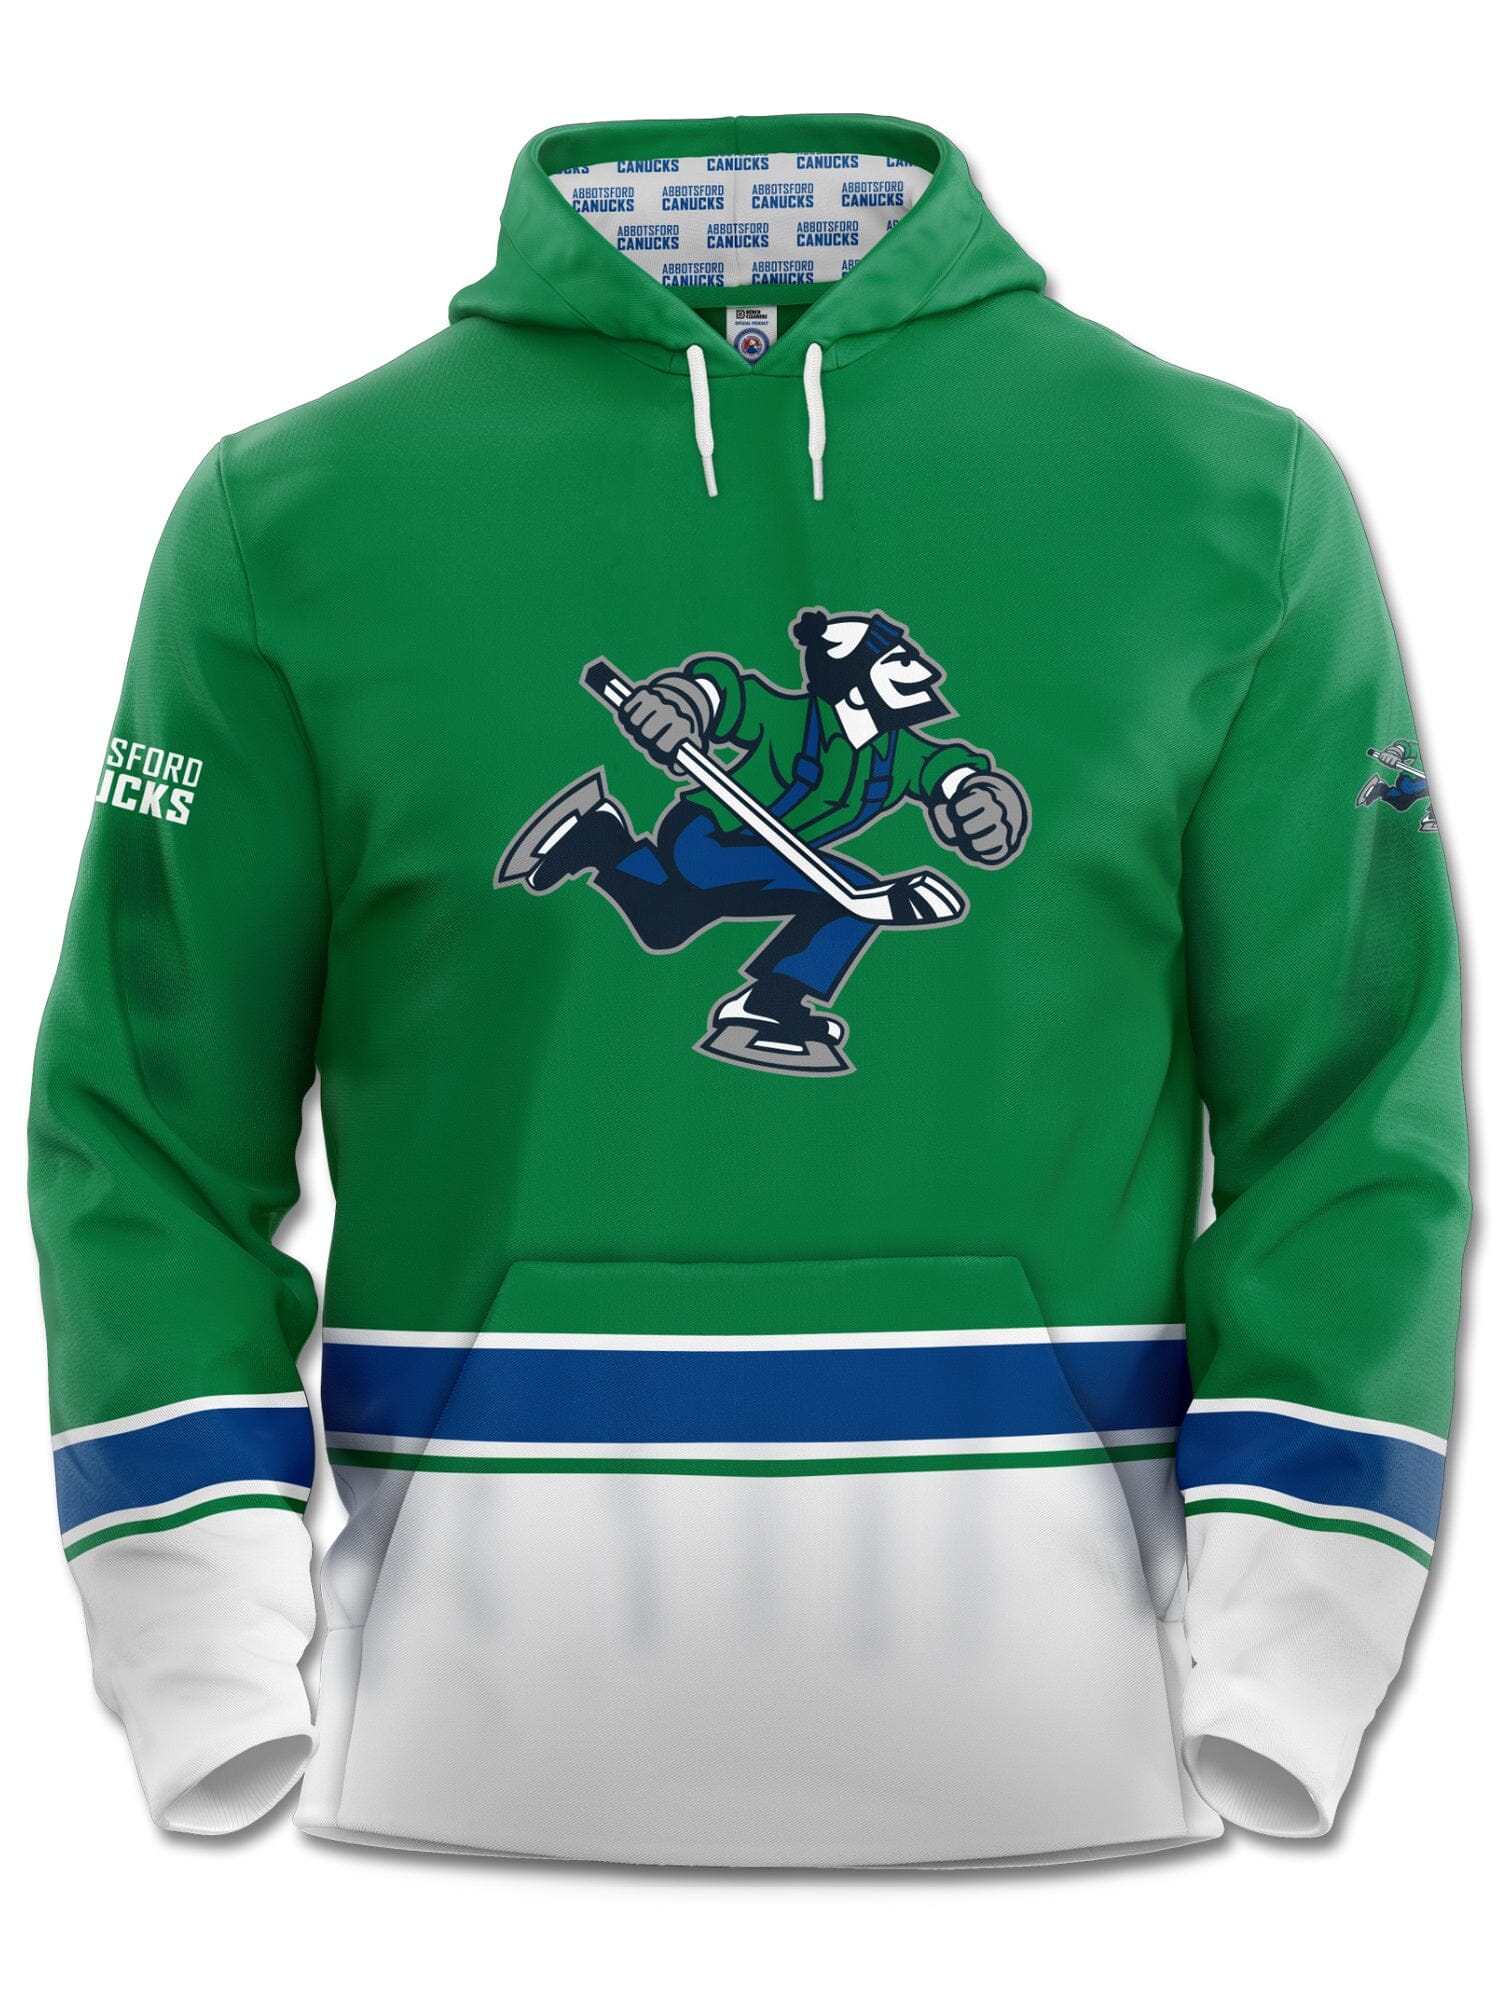 Abbotsford Canucks Hockey Hoodie - FRONT